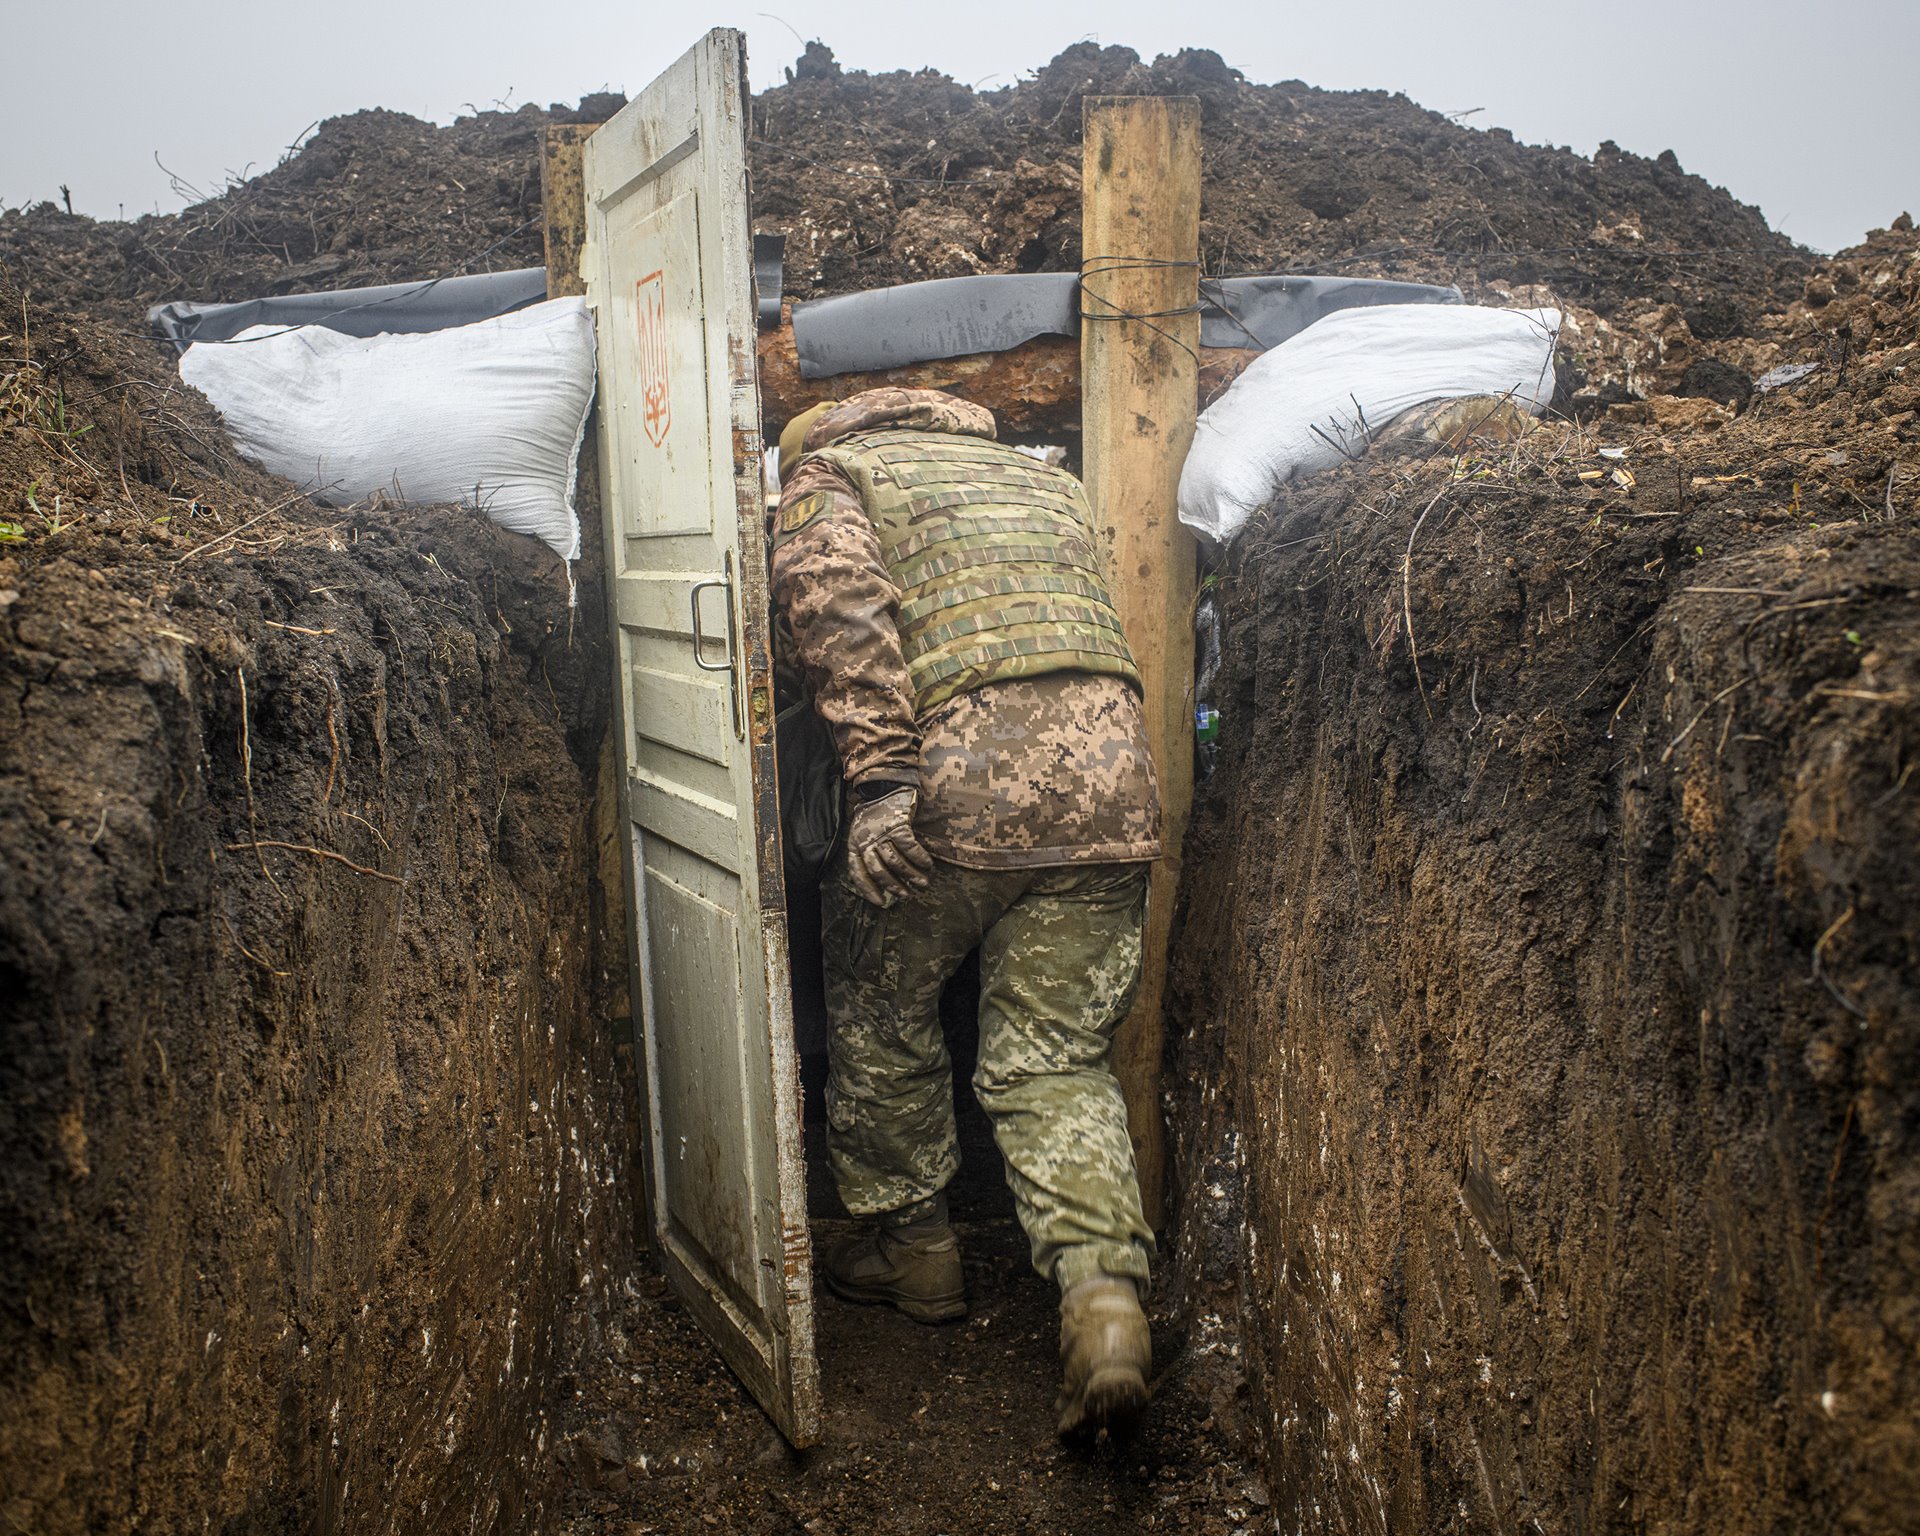 A soldier enters a shelter in a new trench dug by Ukrainian military forces after withdrawal of both Ukrainian and pro-Russian forces for an area of one kilometer along the front near the town of Zolote, in Donbas, Ukraine. The withdrawal was made possible by the observance of ceasefires.&nbsp;